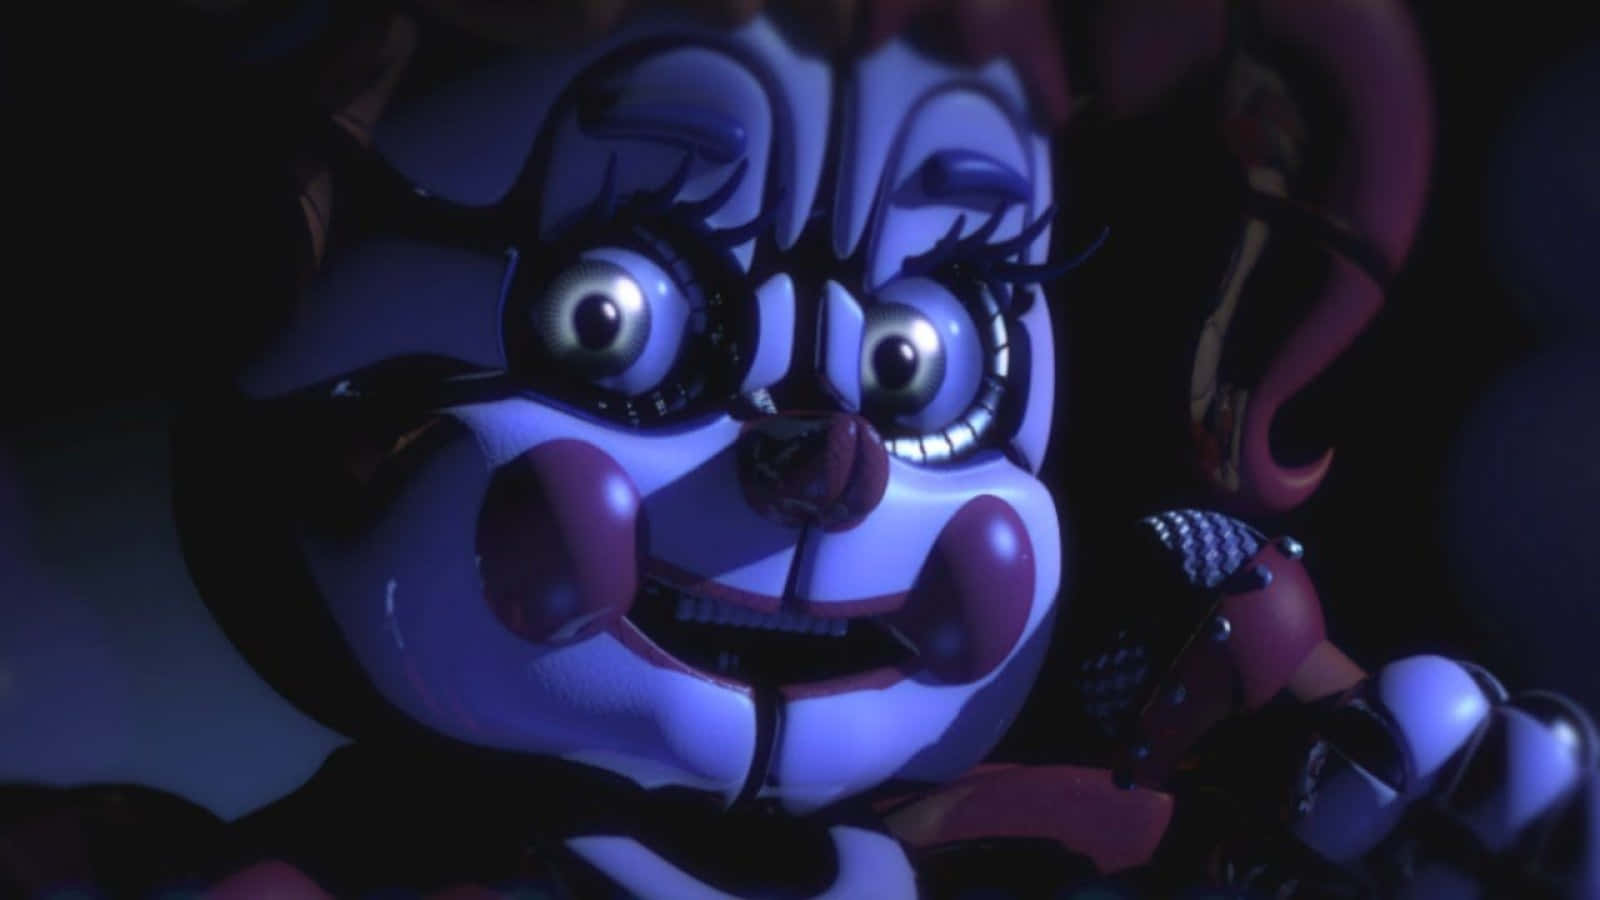 "Explore the eerie world of Sister Location with Five Nights at Freddy's!" Wallpaper